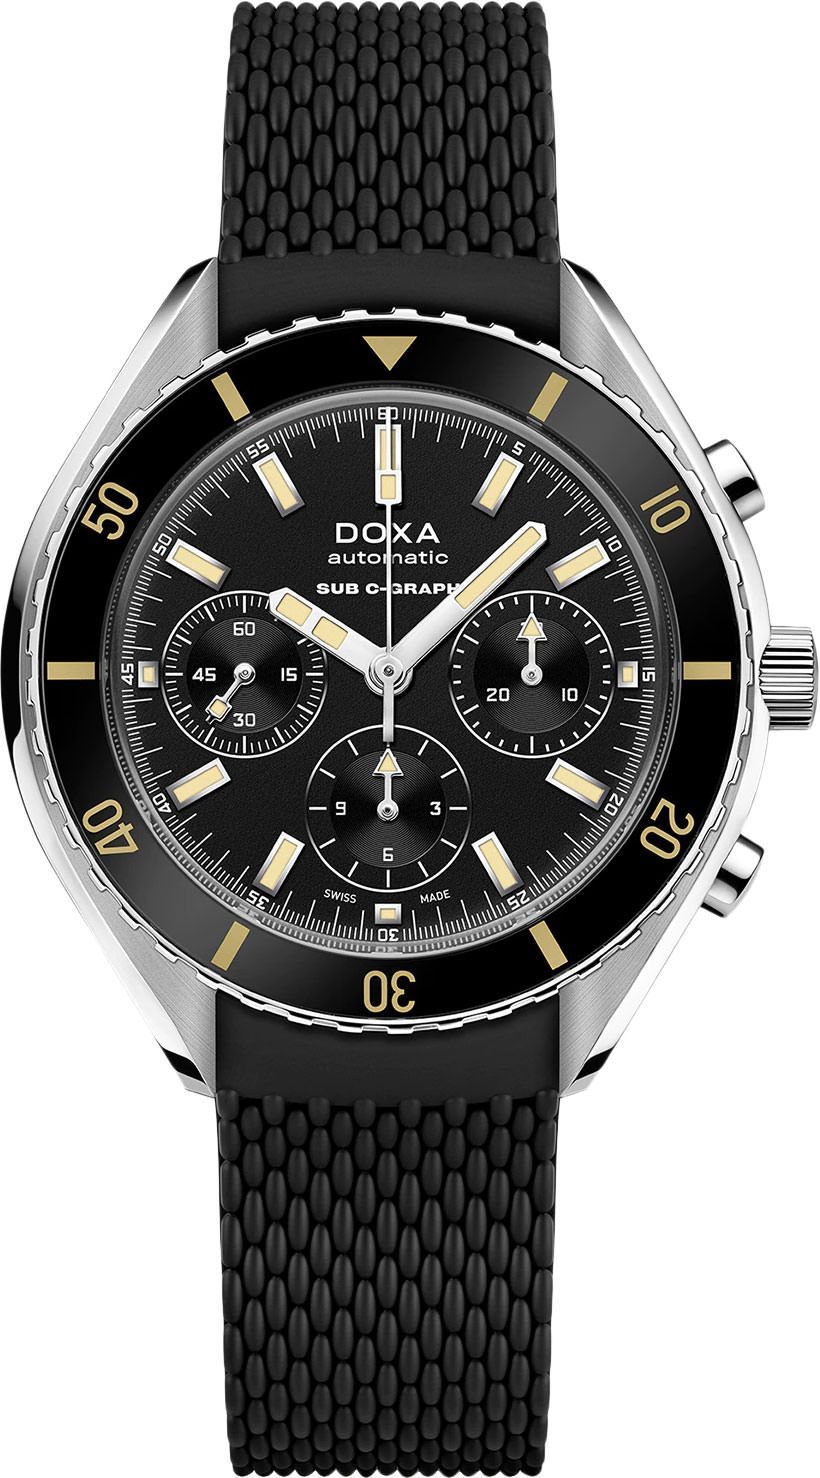 Doxa SUB 200 C-GRAPH Sharkhunter Black Dial 45 mm Automatic Watch For Men - 1